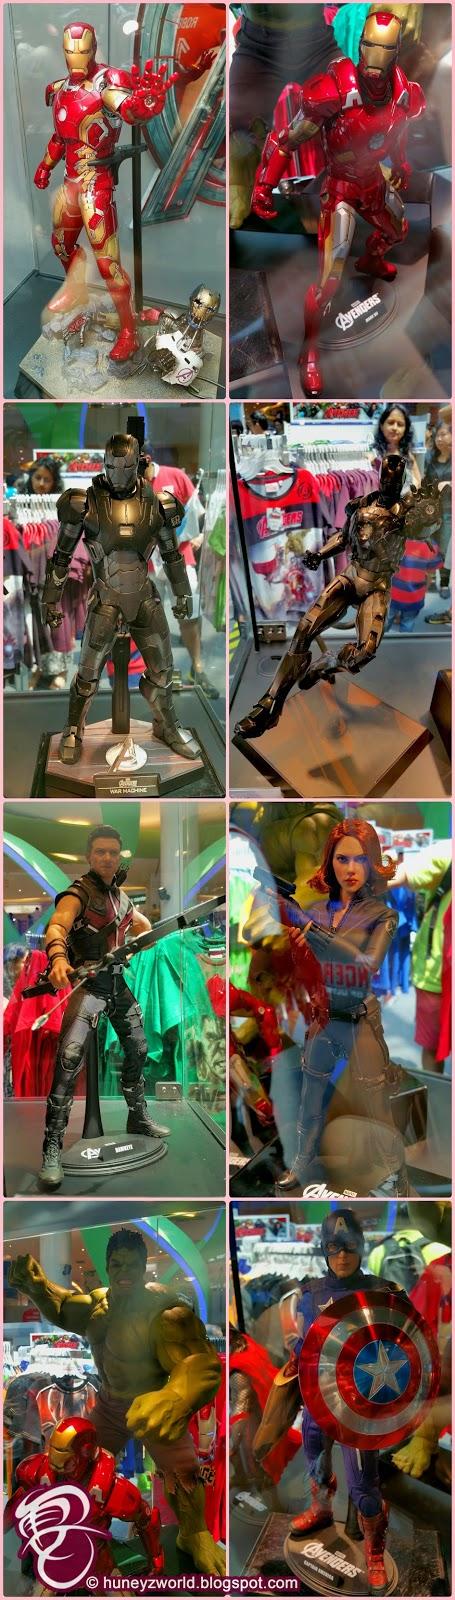 [Updated] Heroes Gather At Vivocity For Ultimate The Avengers Experience!